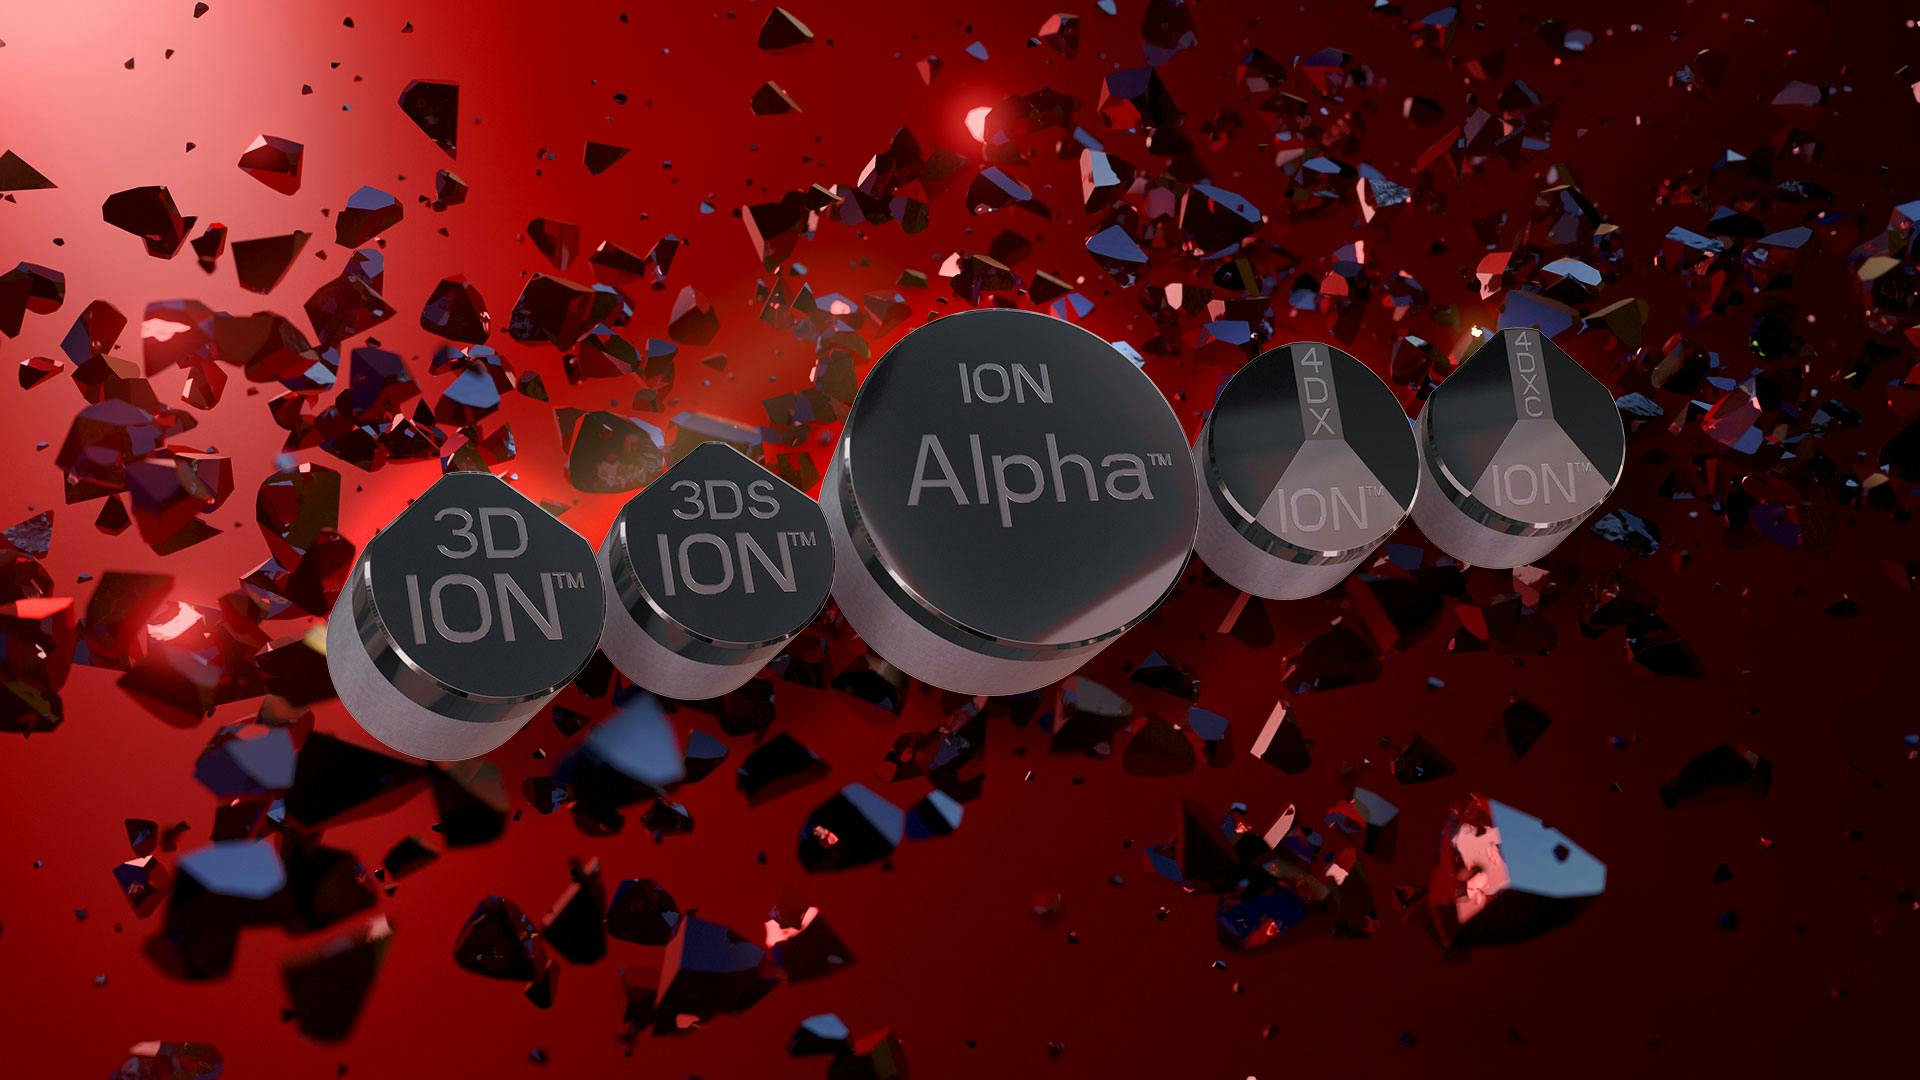 ION cutters including Alpha render